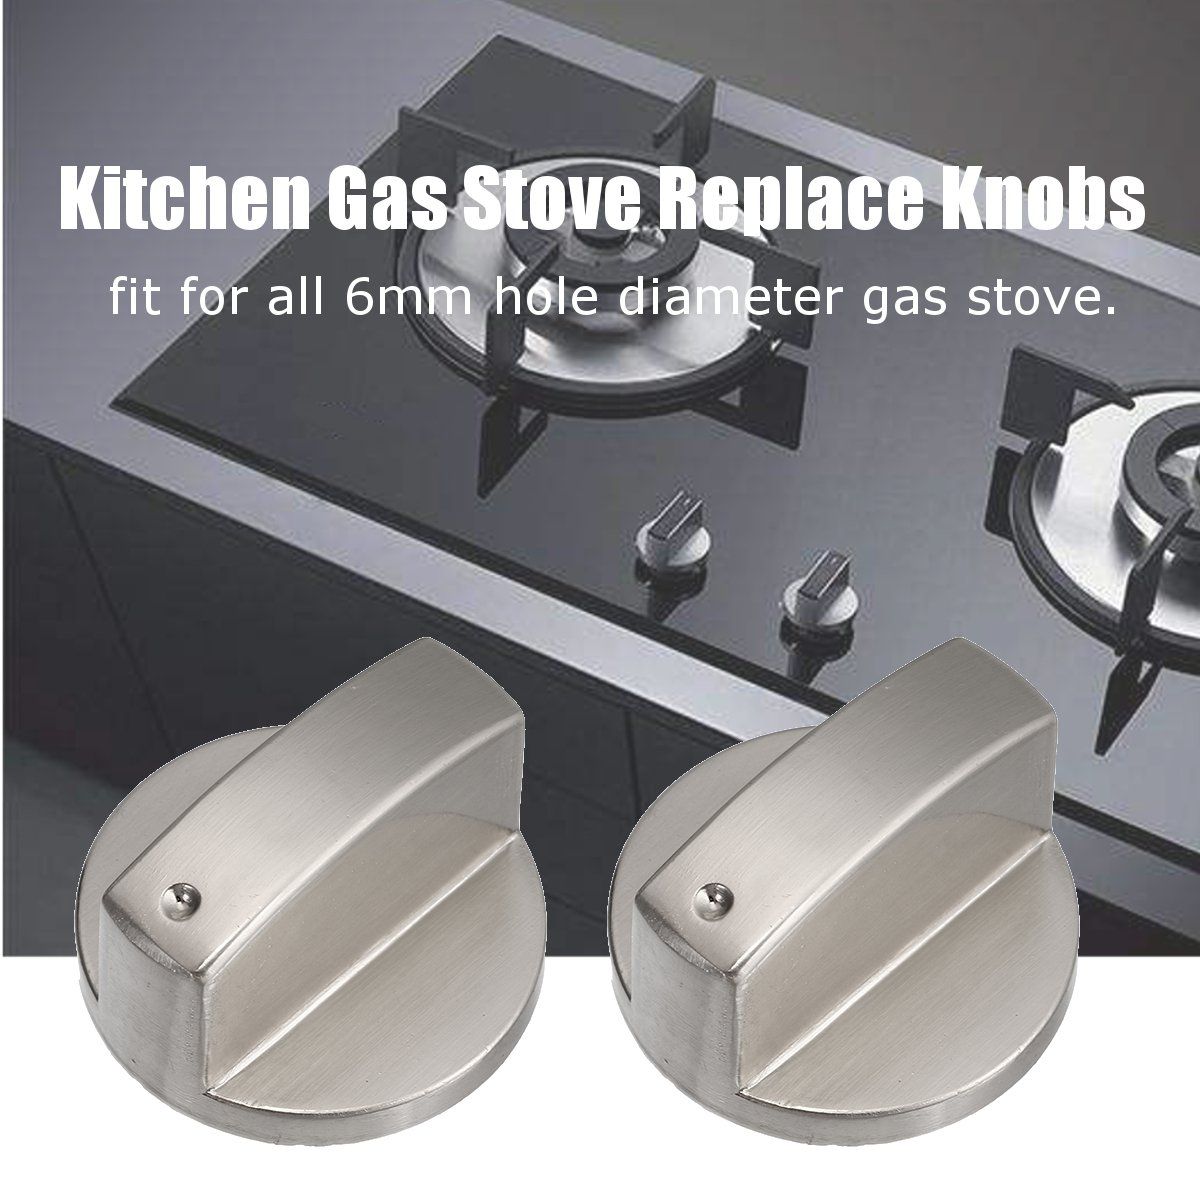 2PCSPACK-6mm-Gas-Stove-Knobs-Cooker-Oven-Cooktop-Metal-Switch-Control-Kitchen-1581159